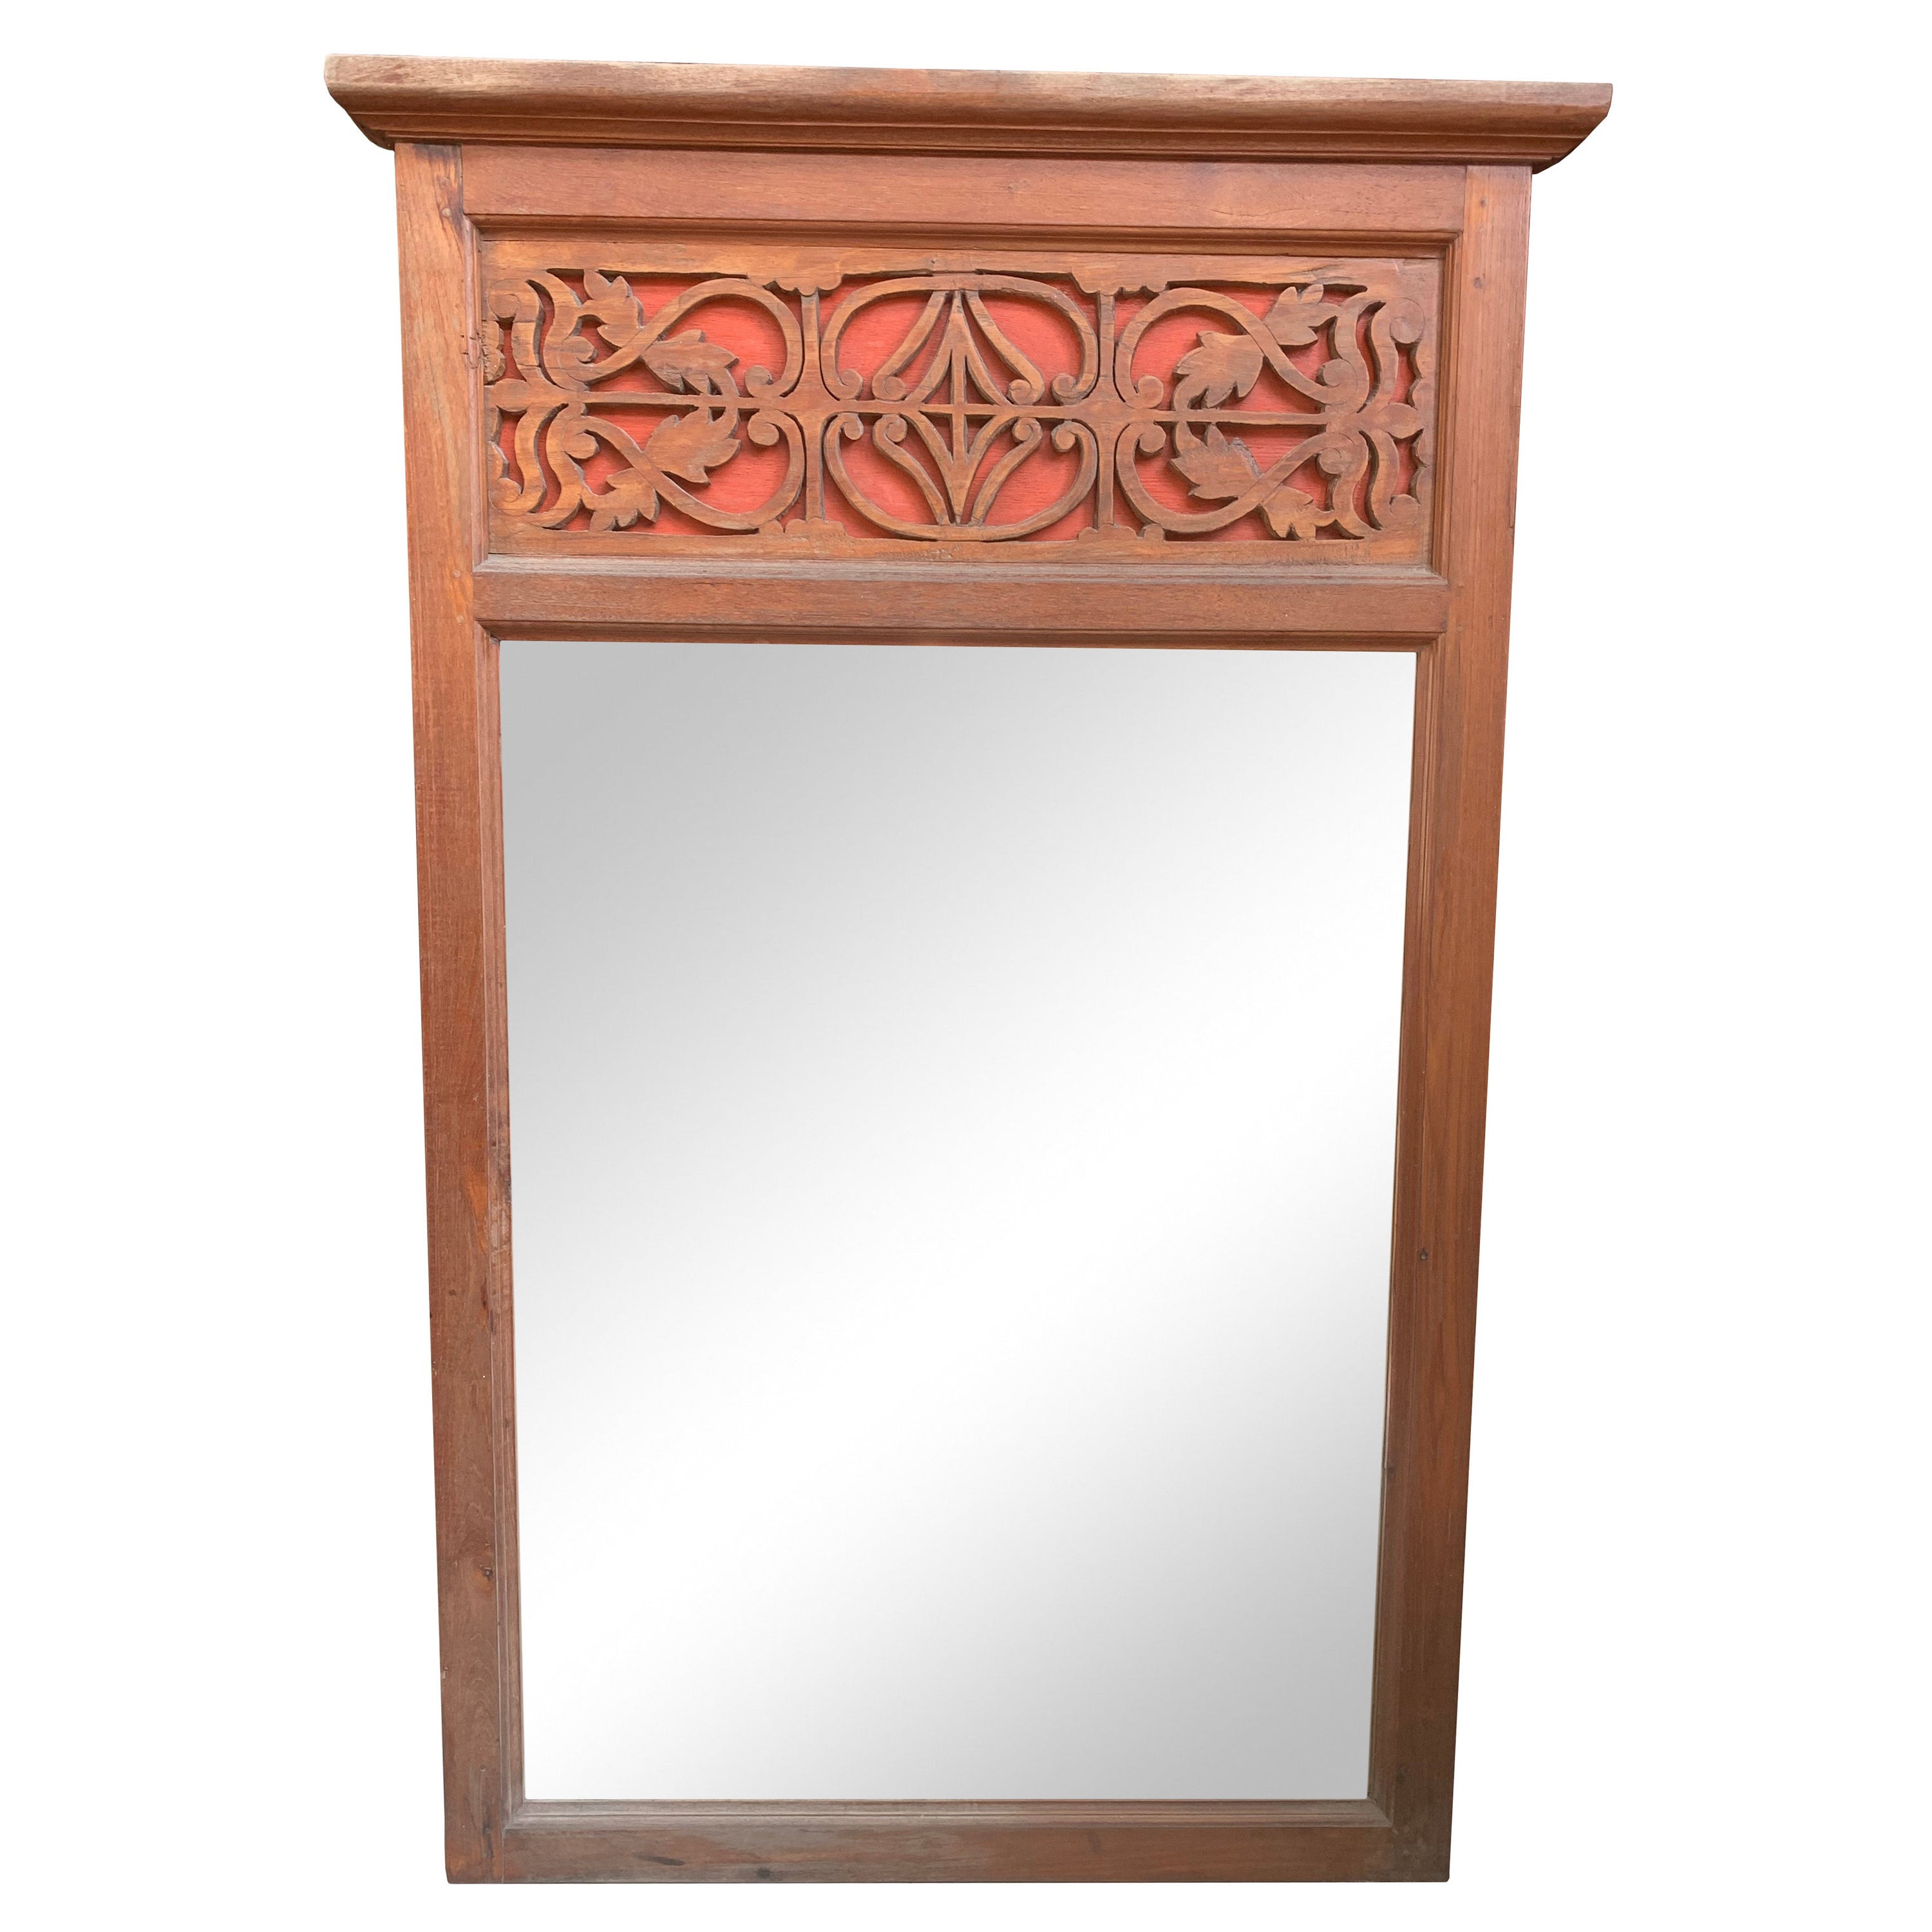 Teak Wood Framed Mirror with Floral Carving and Red Polychrome, Java, Indonesia